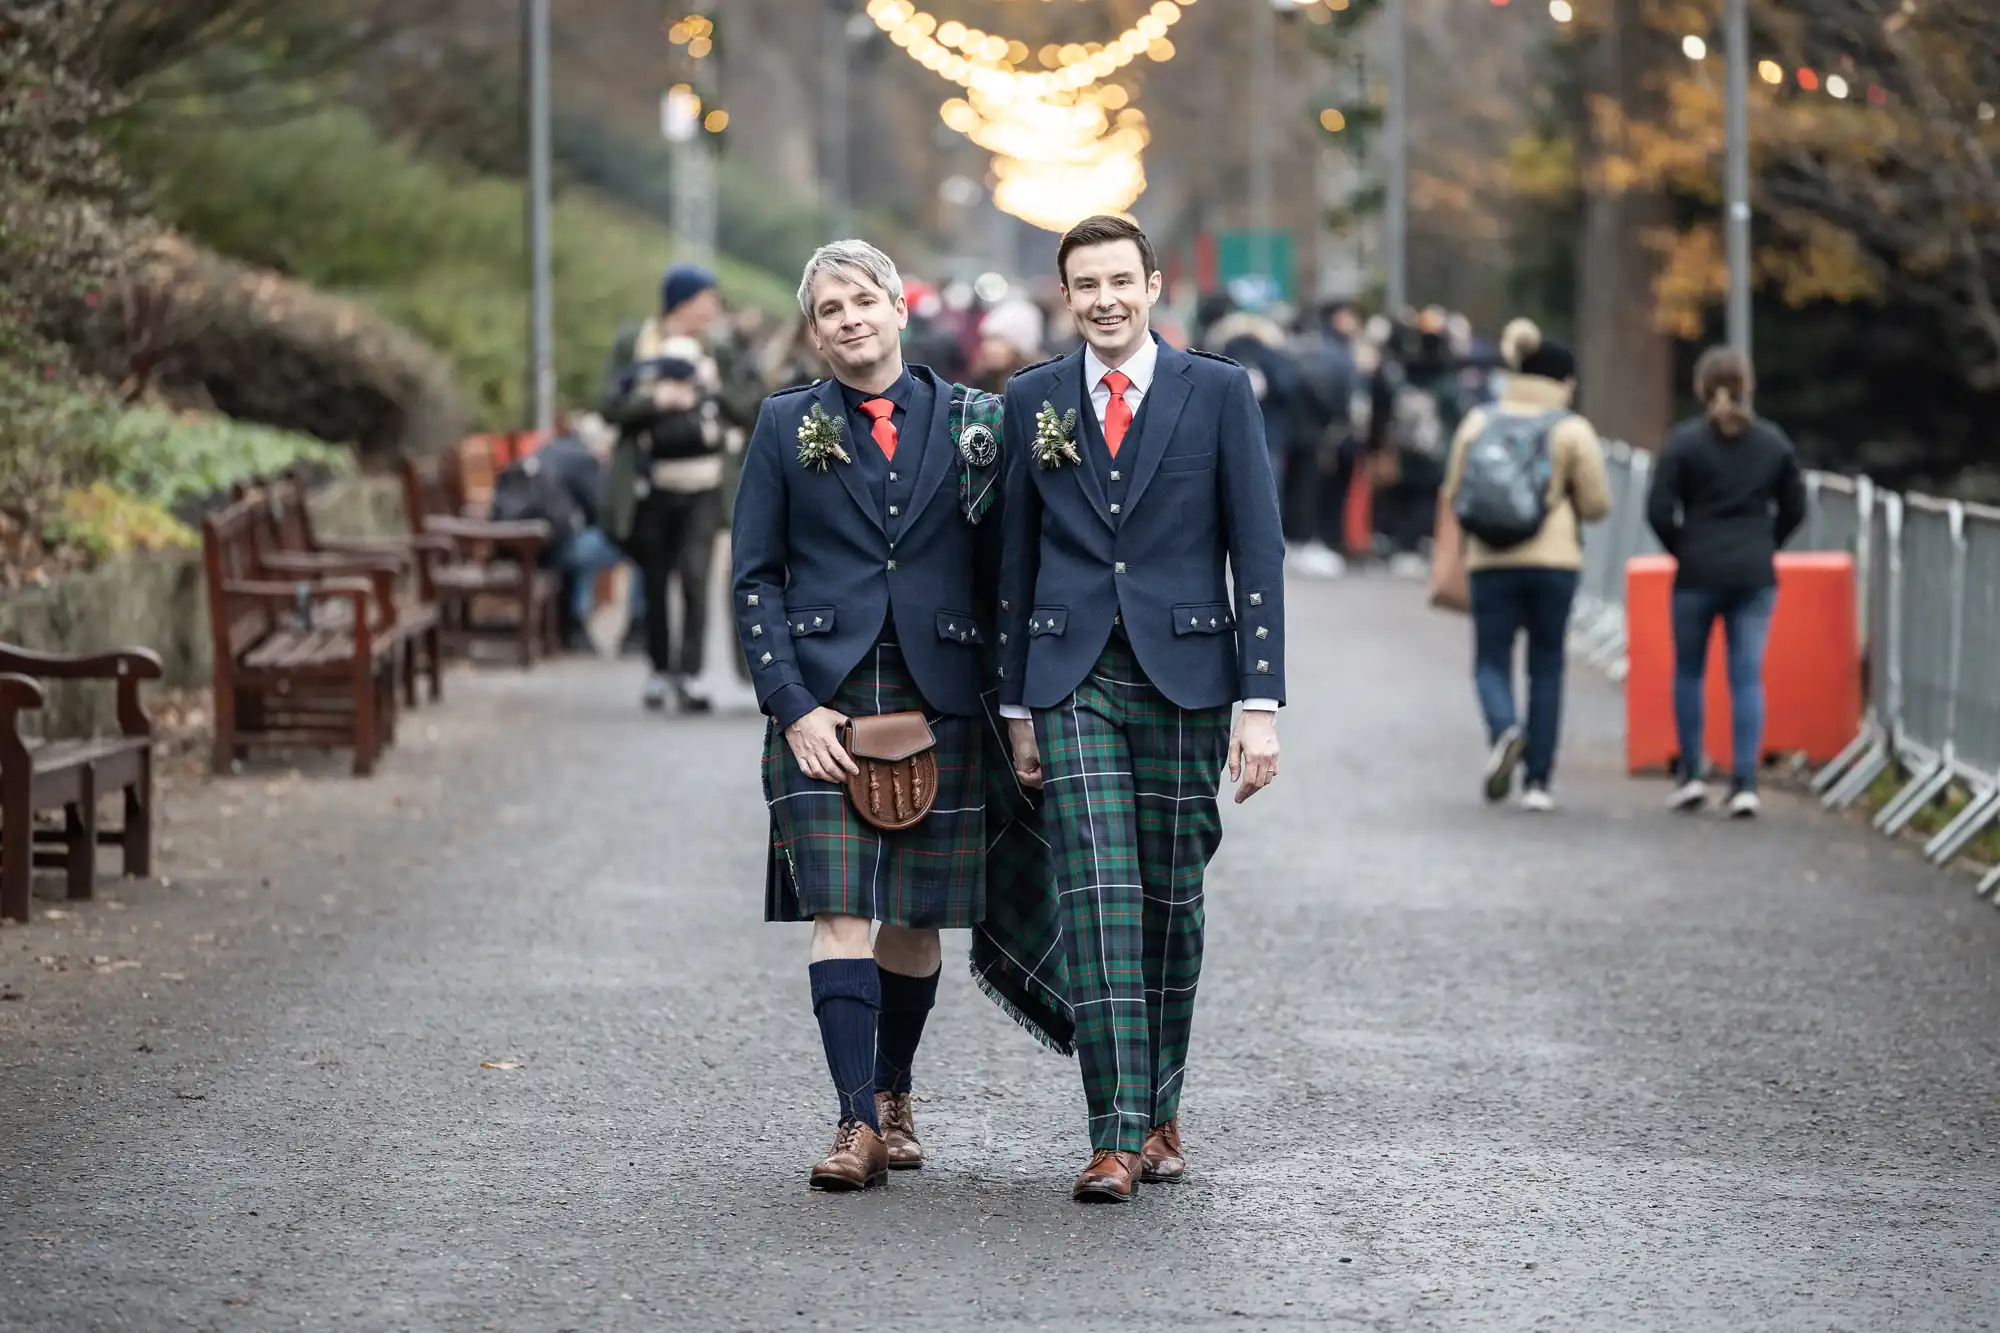 Two individuals dressed in Scottish kilts and formal jackets walk down a street lined with people and trees decorated with string lights.